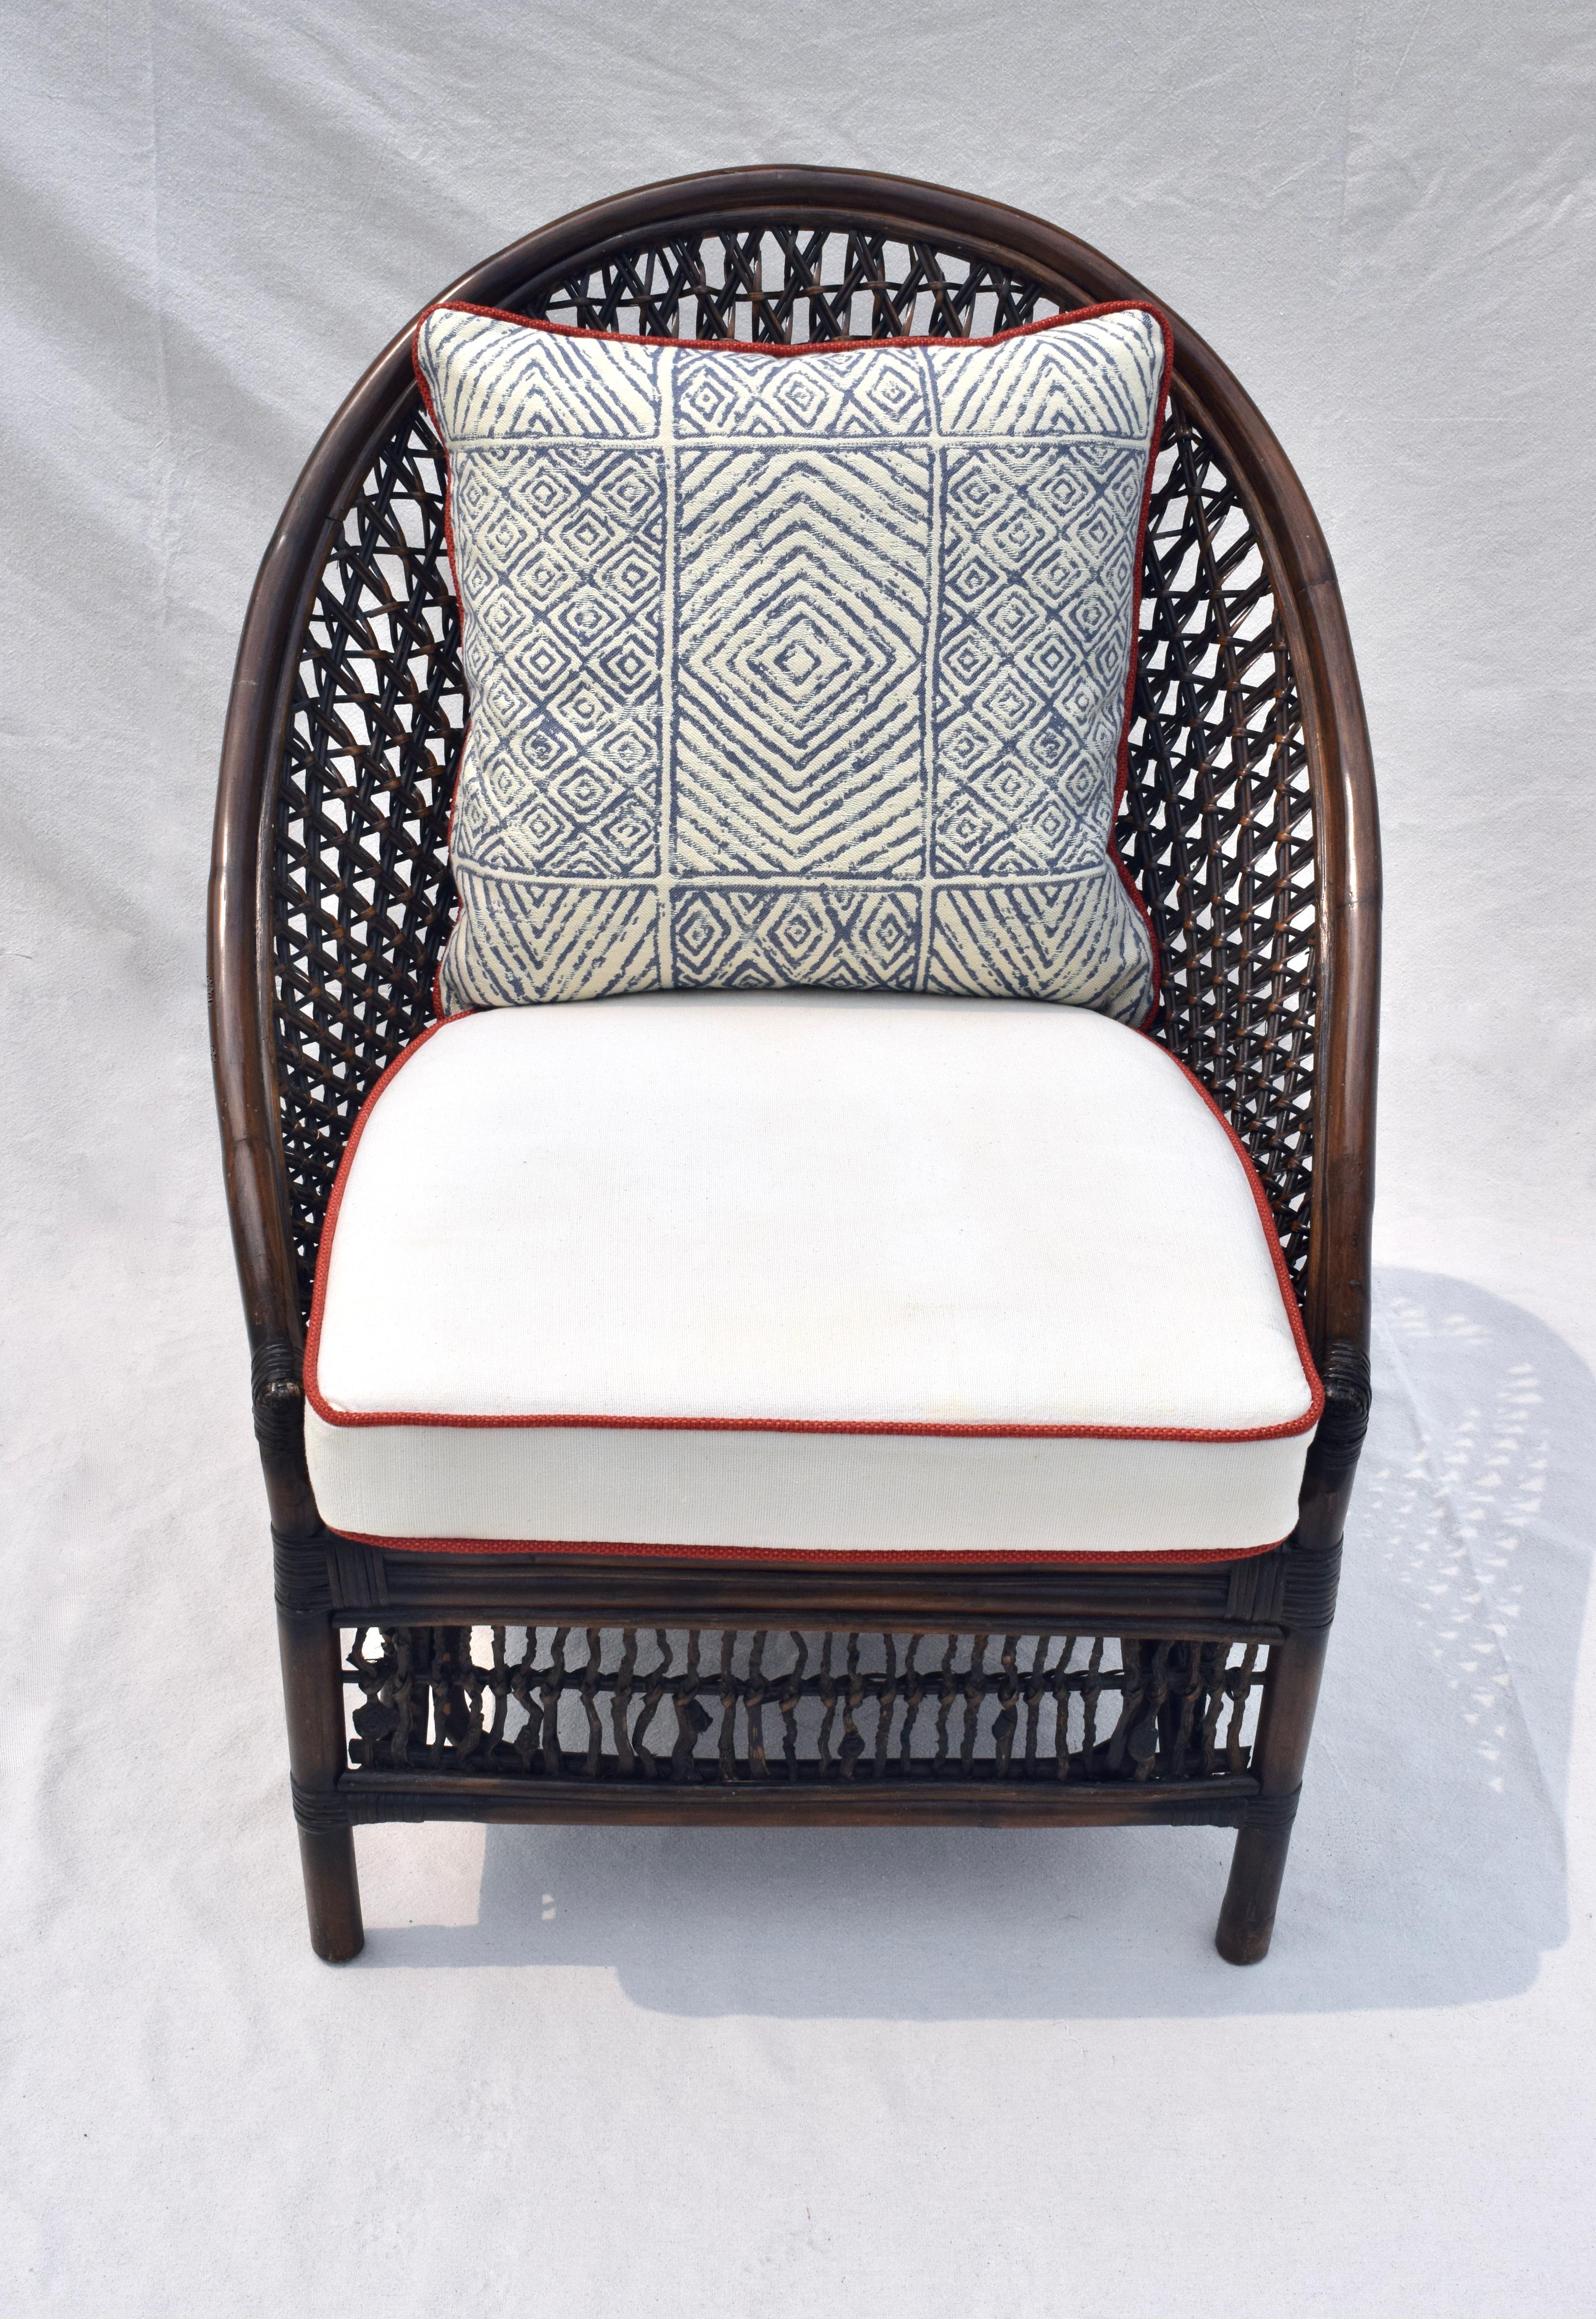 Vintage bamboo & grapevine rattan chair possessing an interesting combination of design elements as seen in peacock, fan back & barrel chairs. Original Sunbrella seat cushion is in excellent vintage condition enhanced with a plush custom goose down